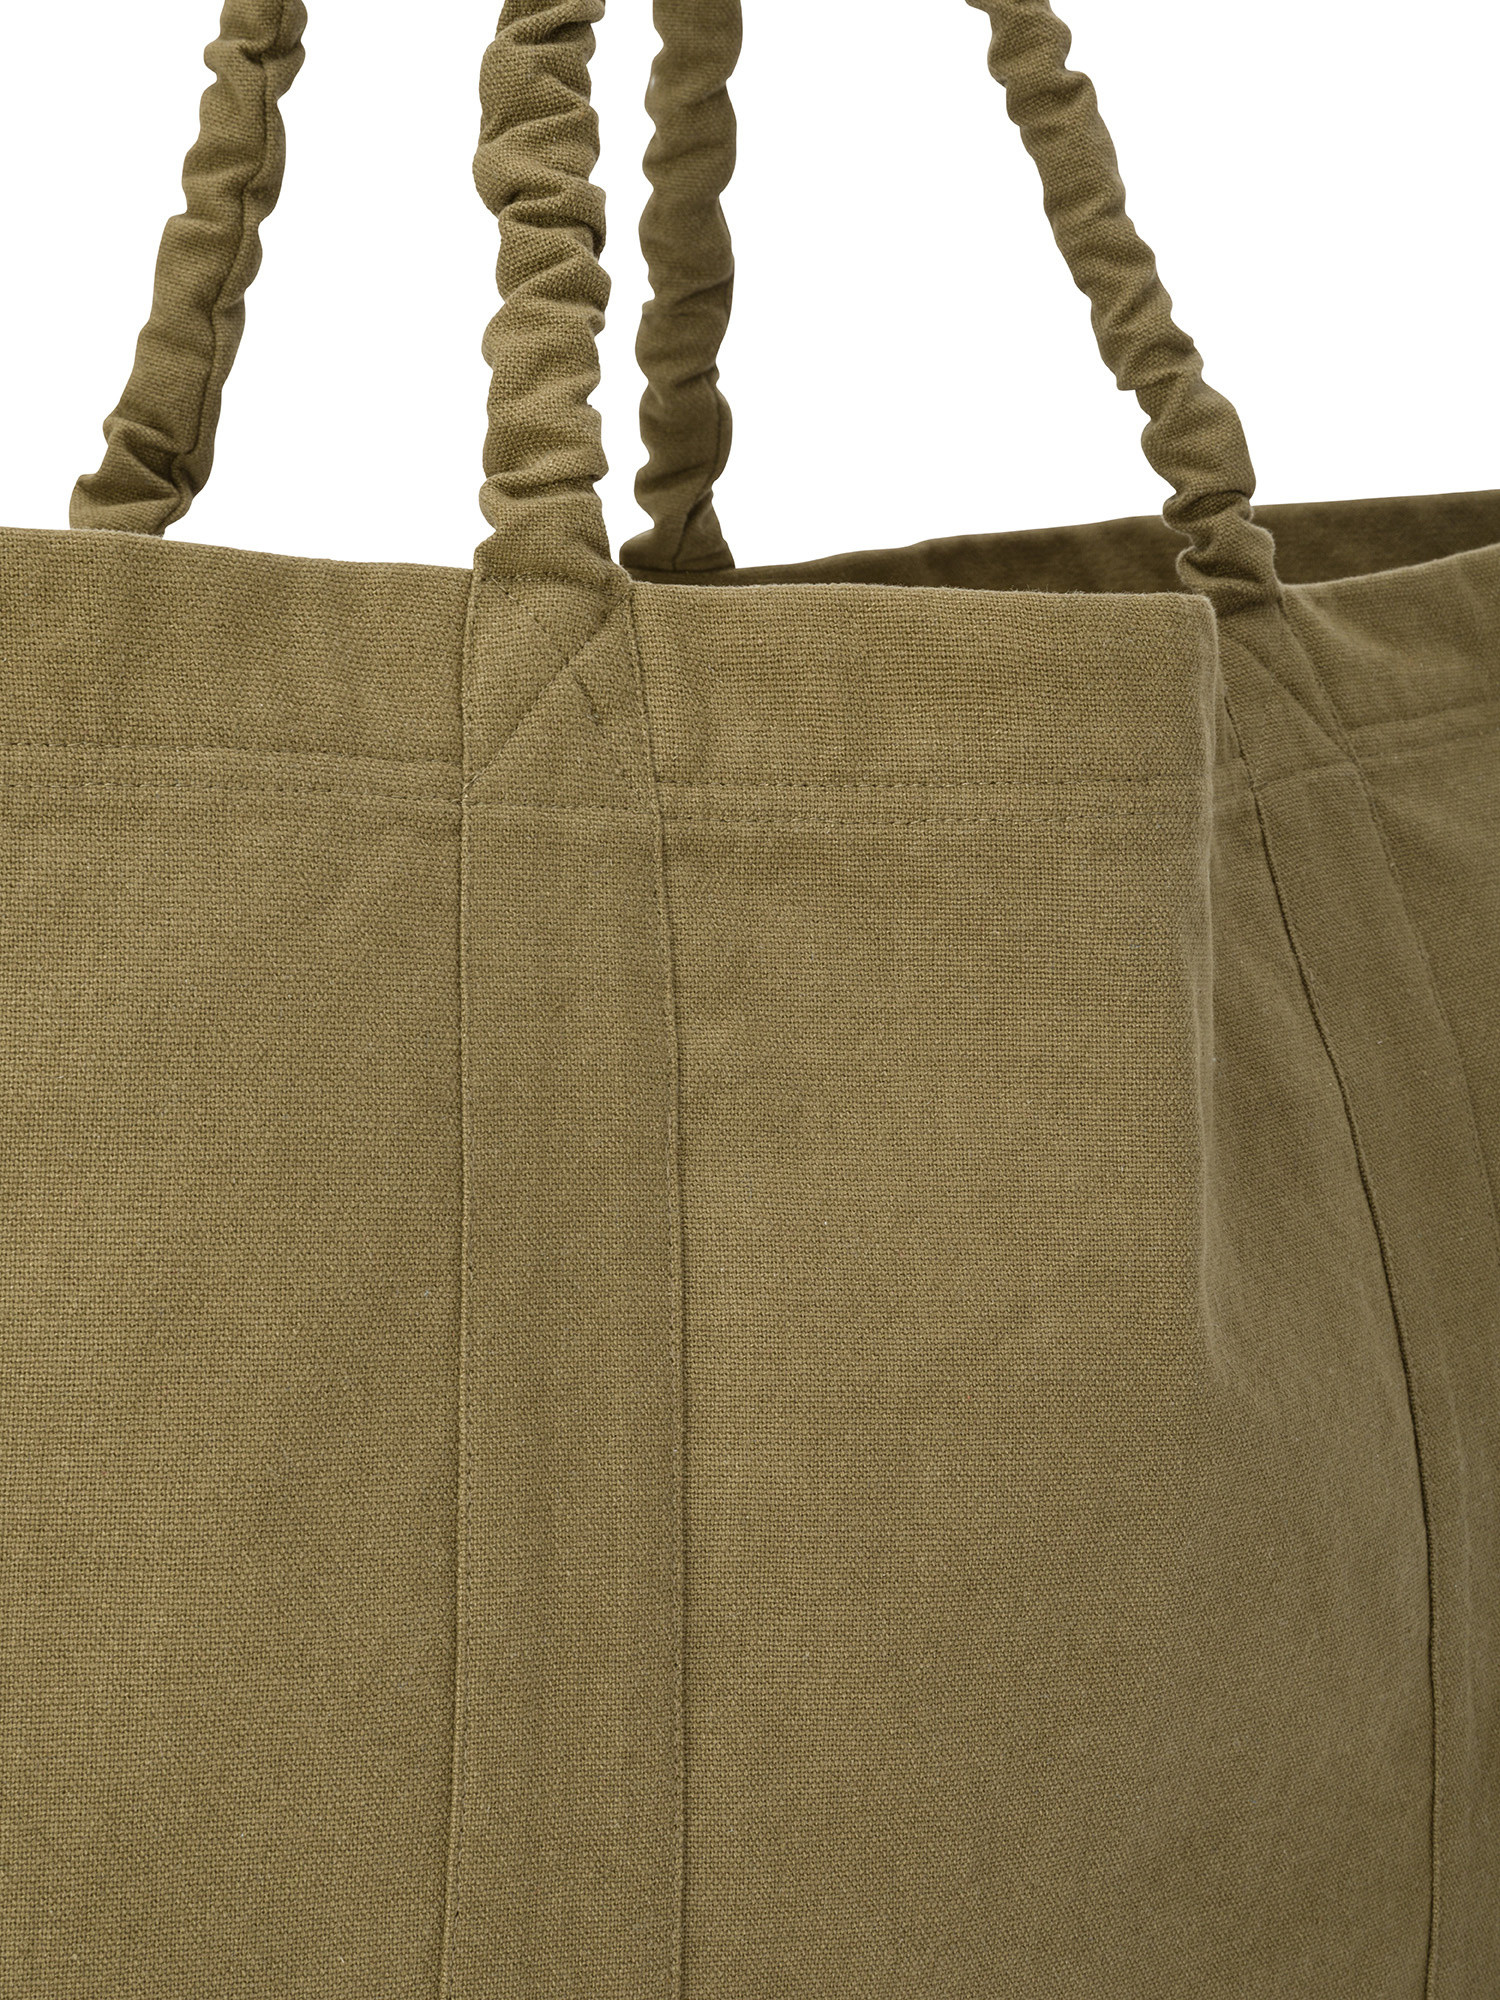 Pure cotton shopper, Olive Green, large image number 2